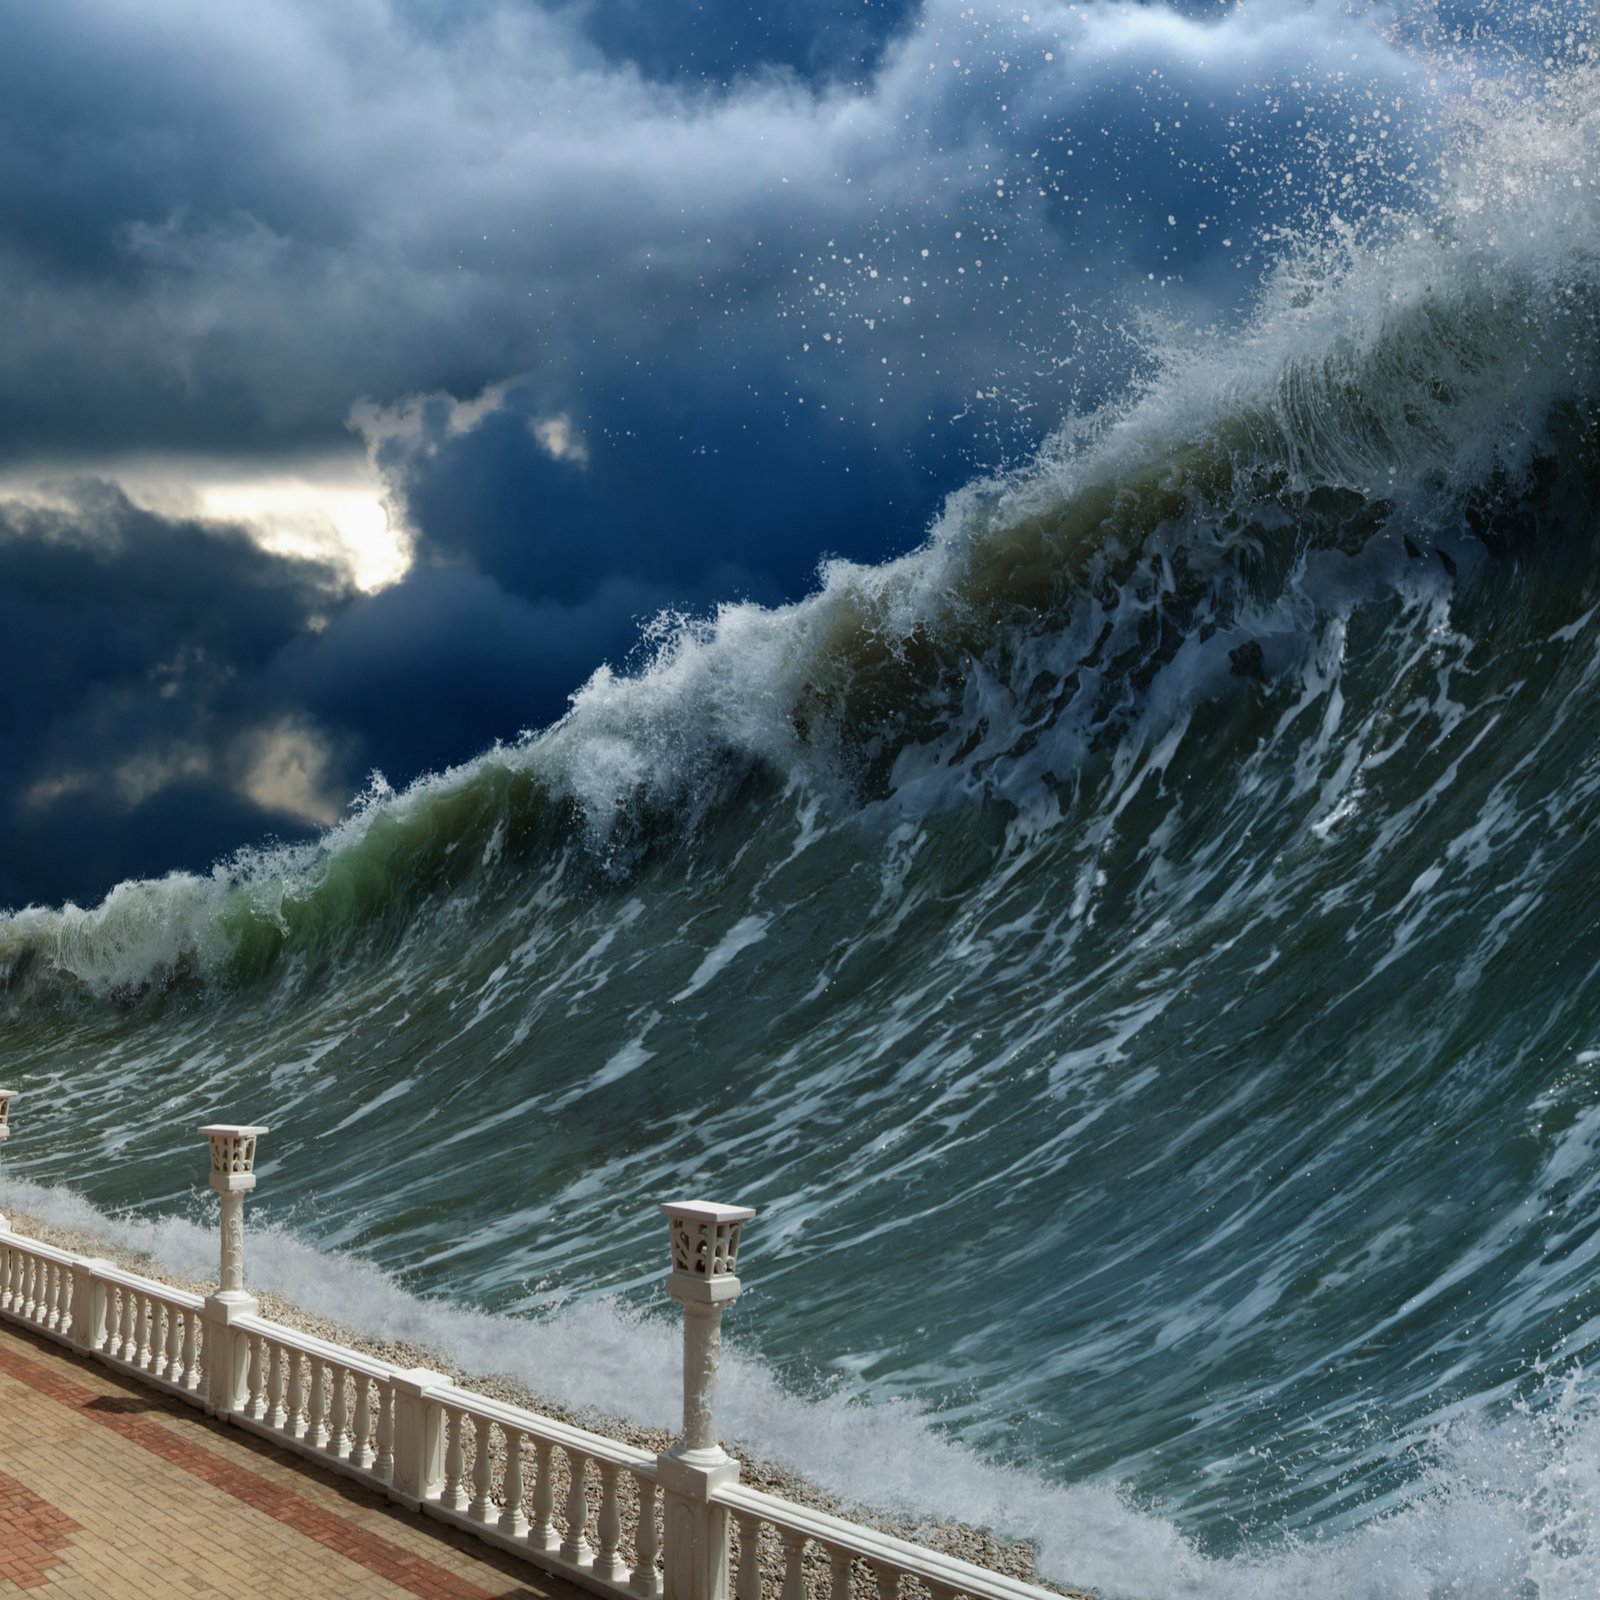 This Week in Bitcoin: The Bitcoin Tsunami is Reduced to a Ripple